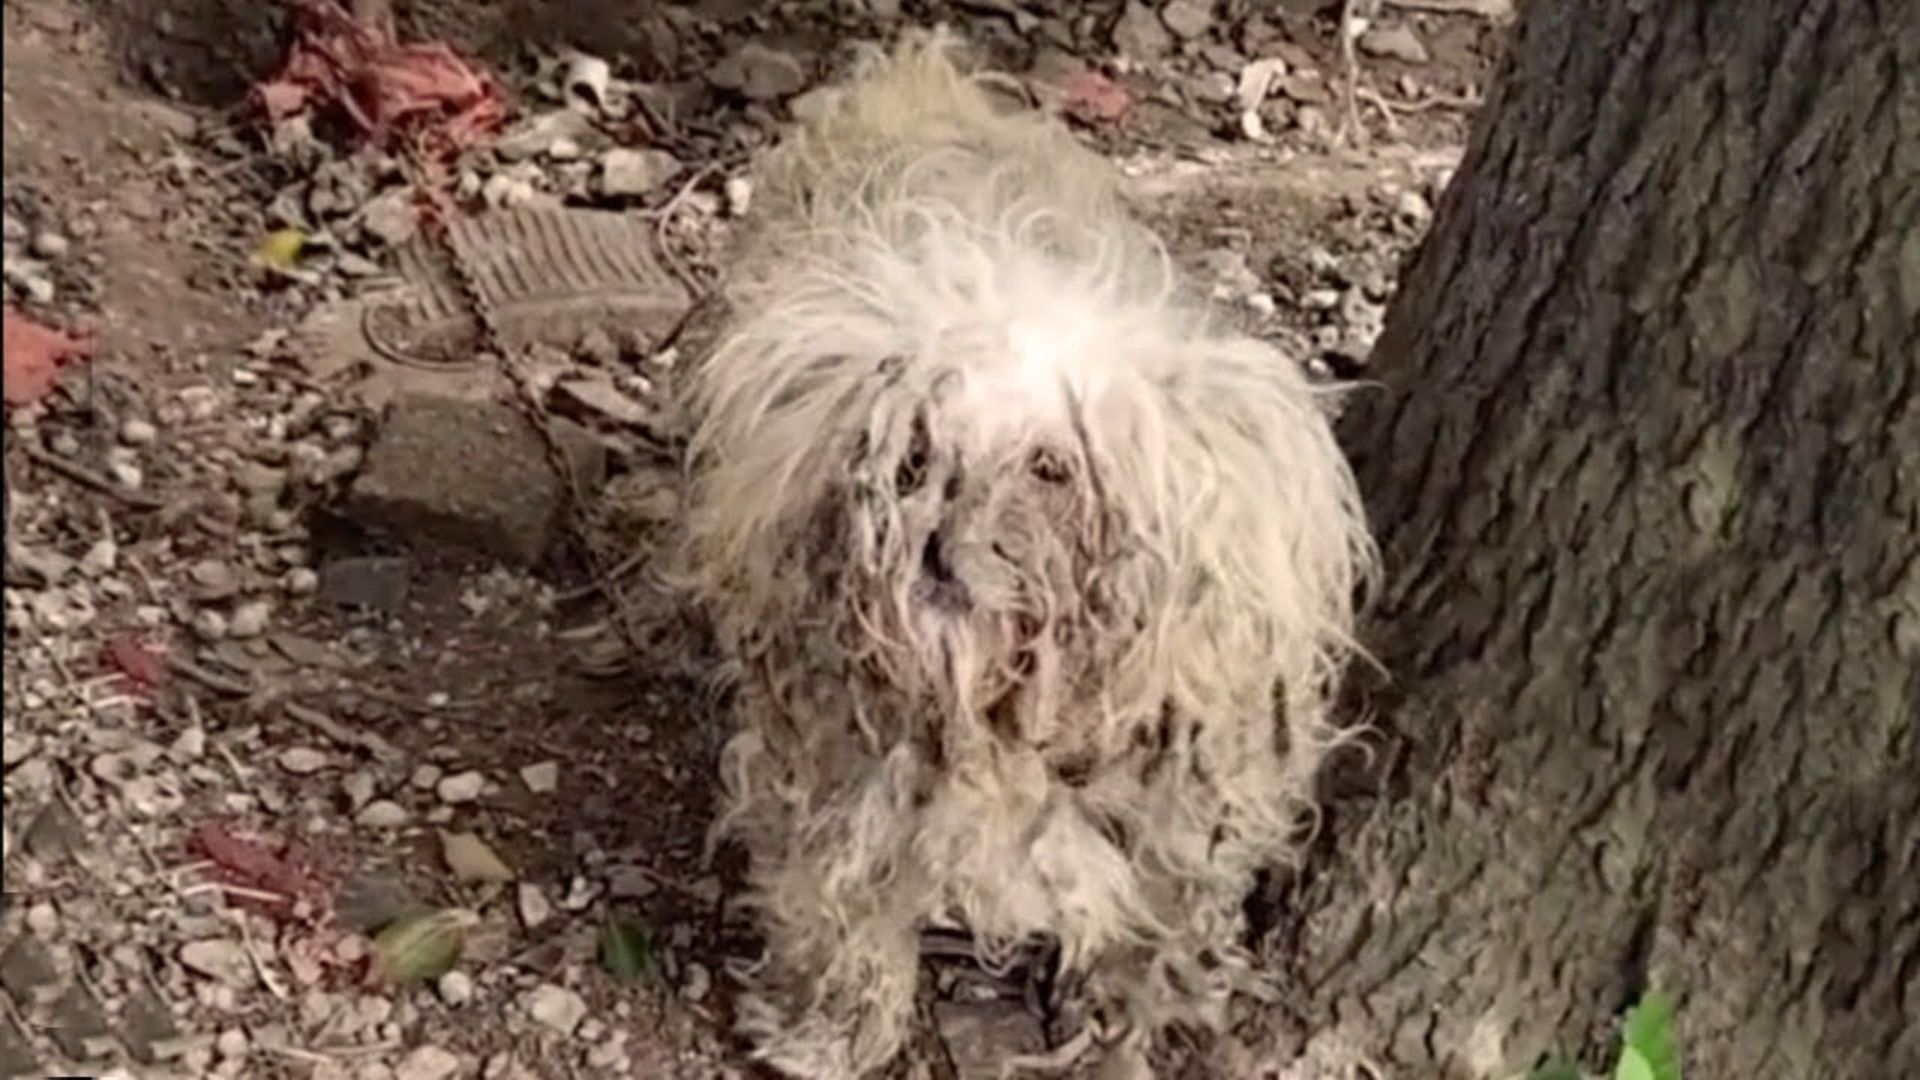 Dog with neglected fur